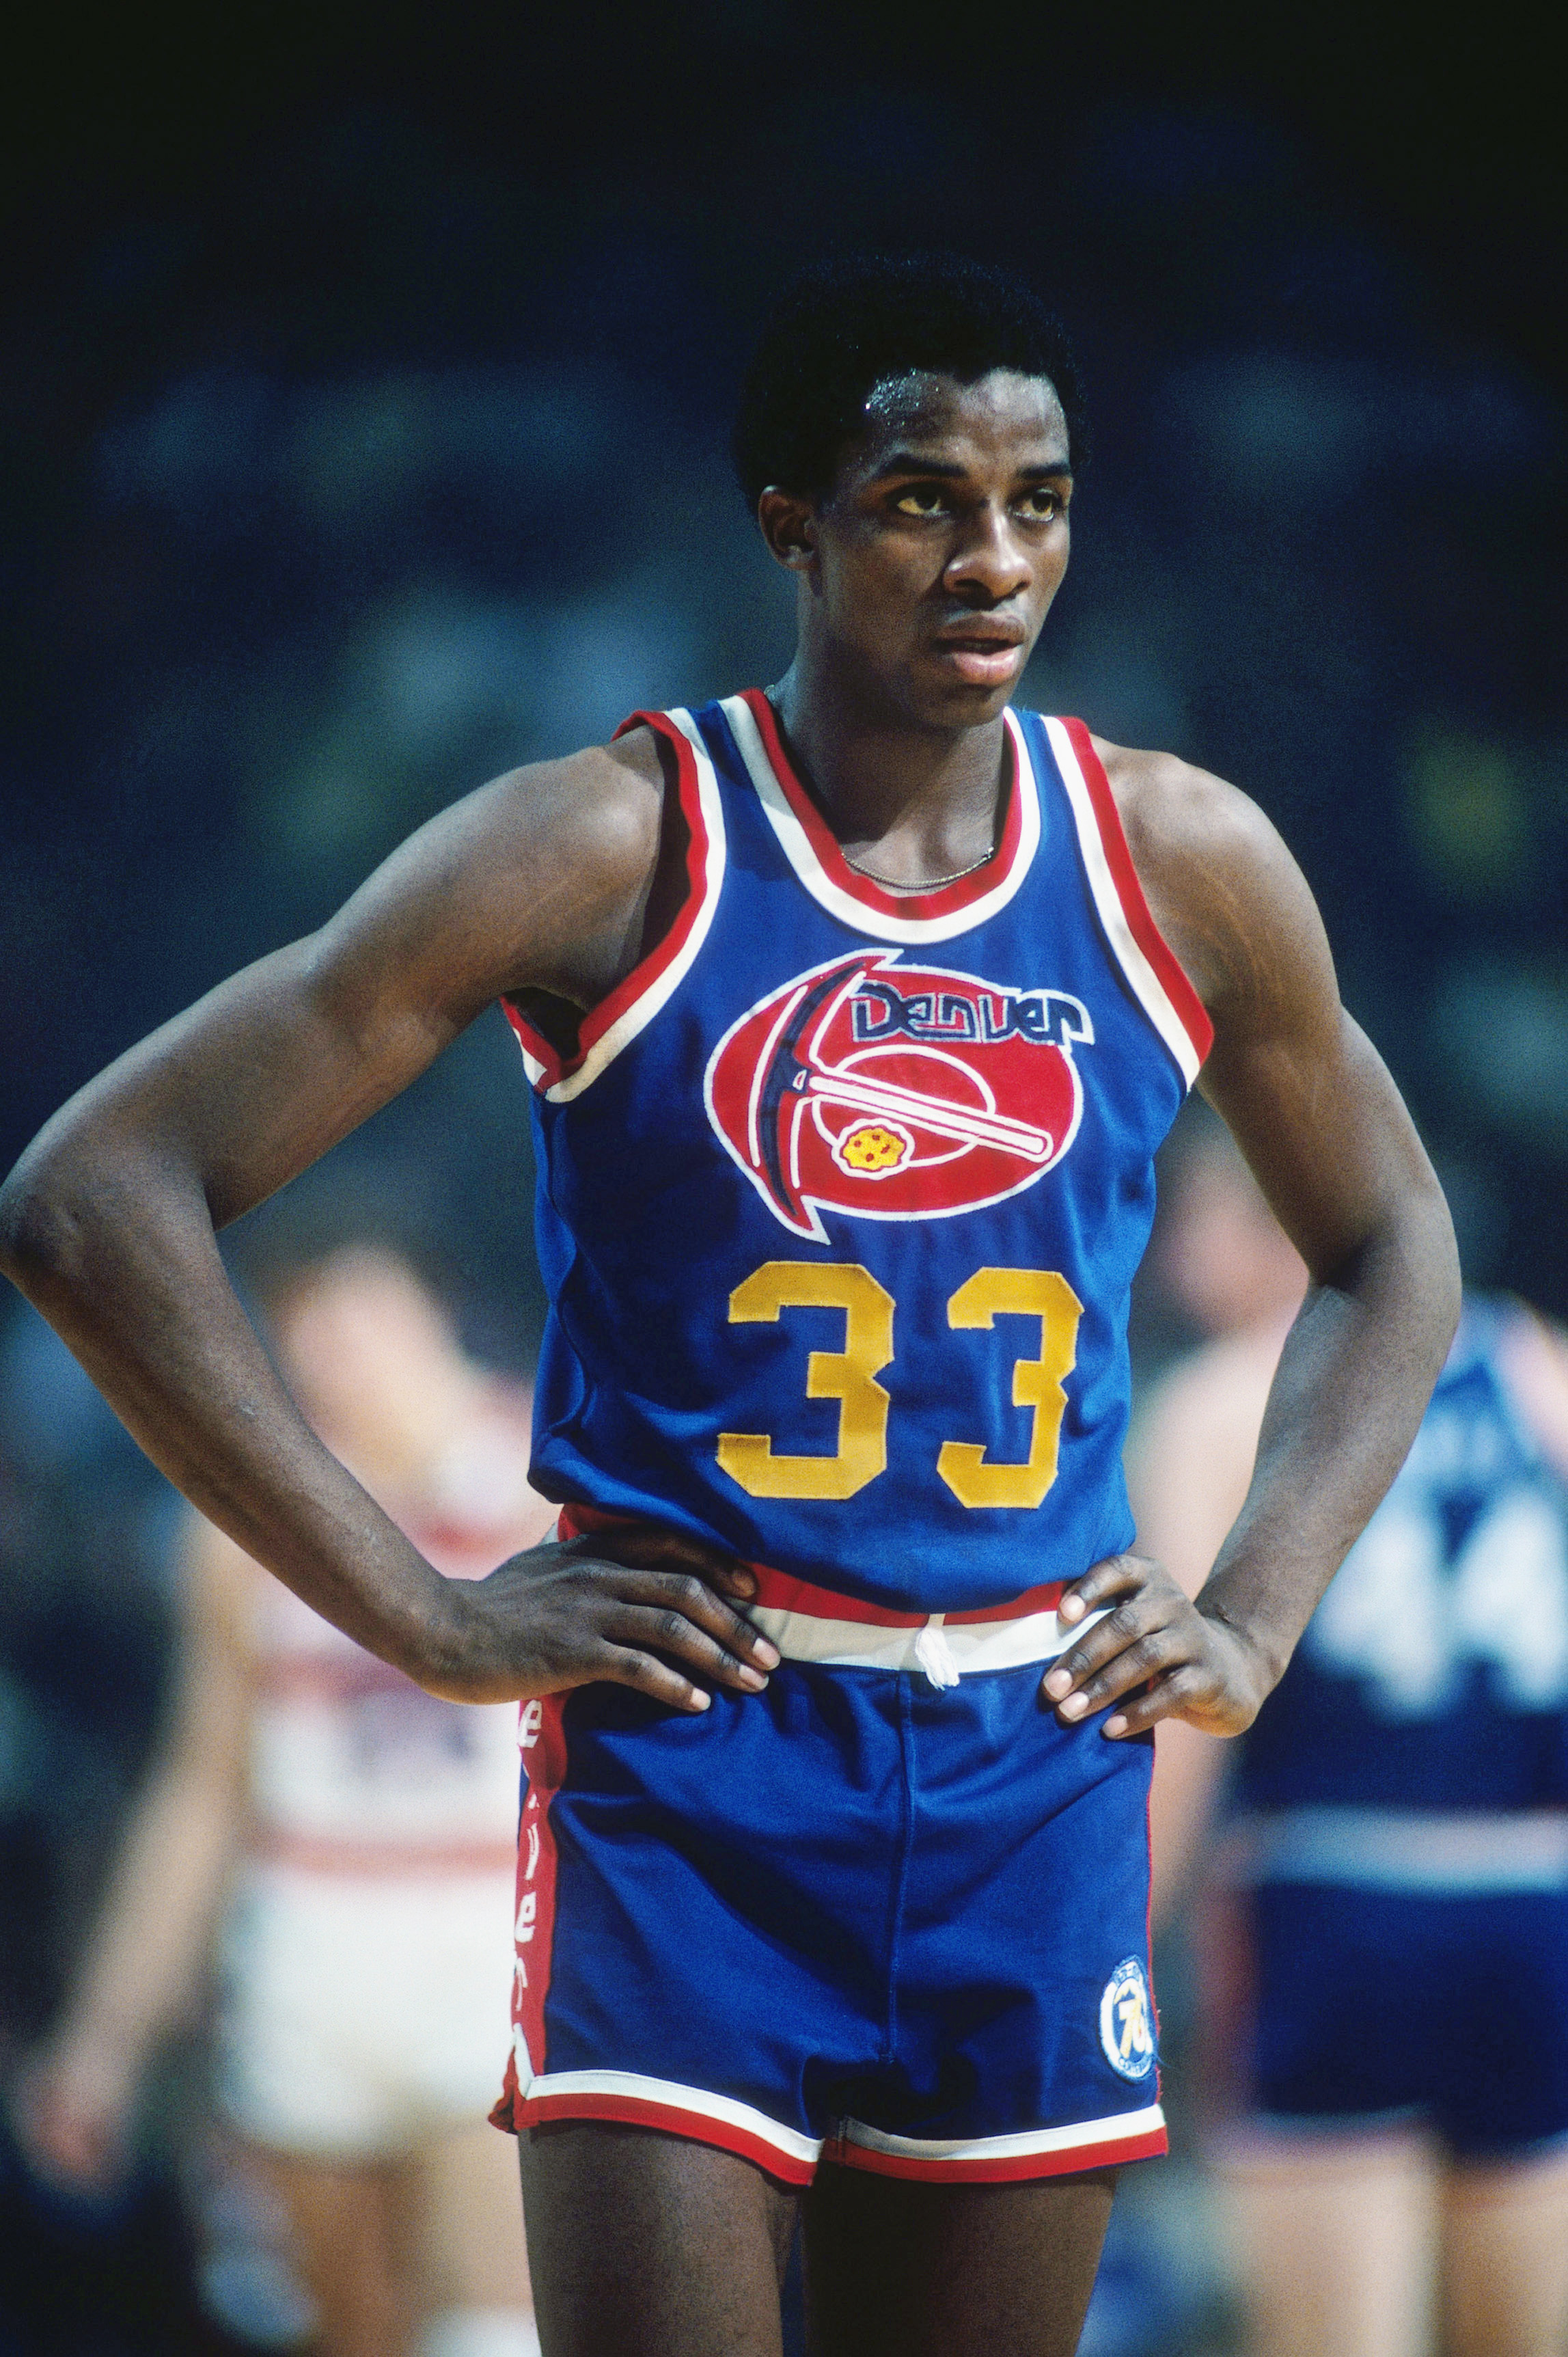 abamx Store Introducing The ABA Legends: David Thompson #33 Retro Denver Nuggets Jersey! 2XS